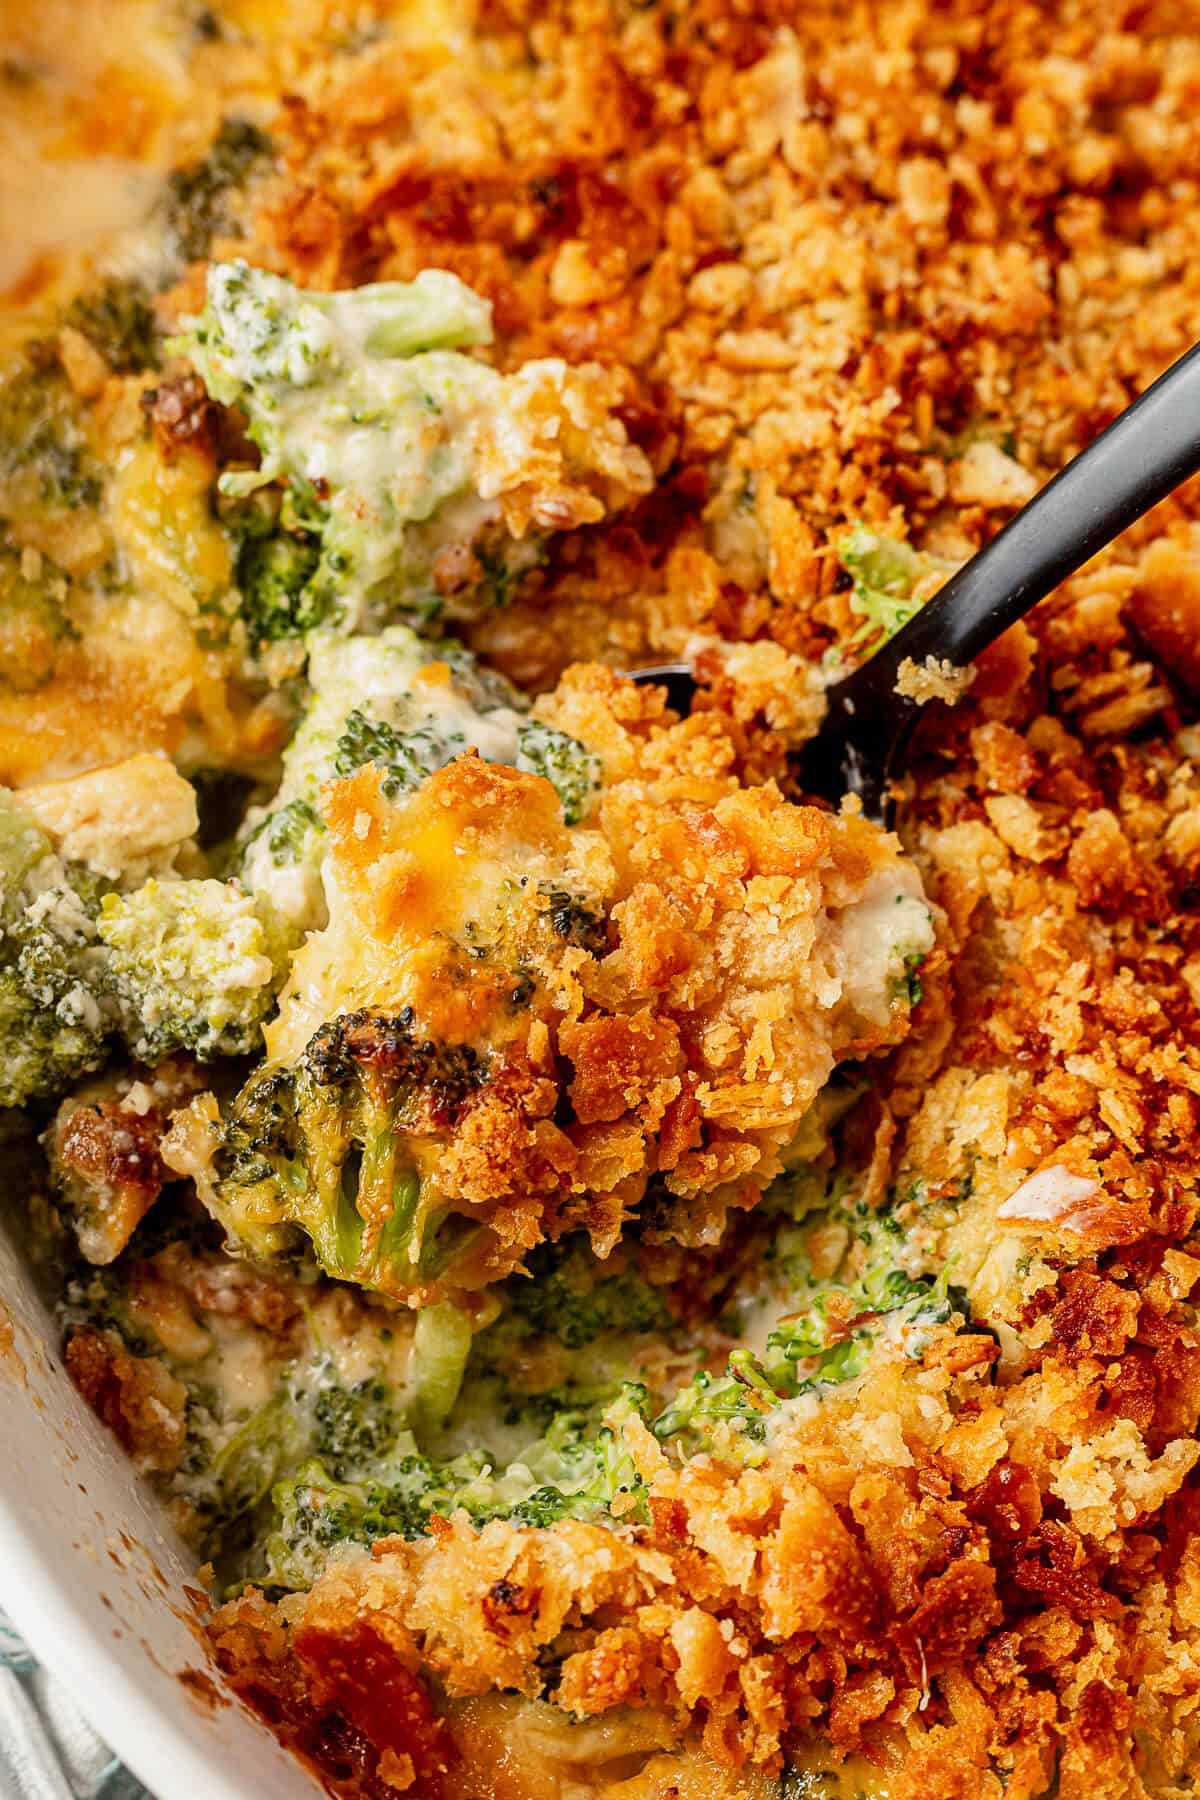 a serving spoon scooping broccoli casserole out of the casserole dish